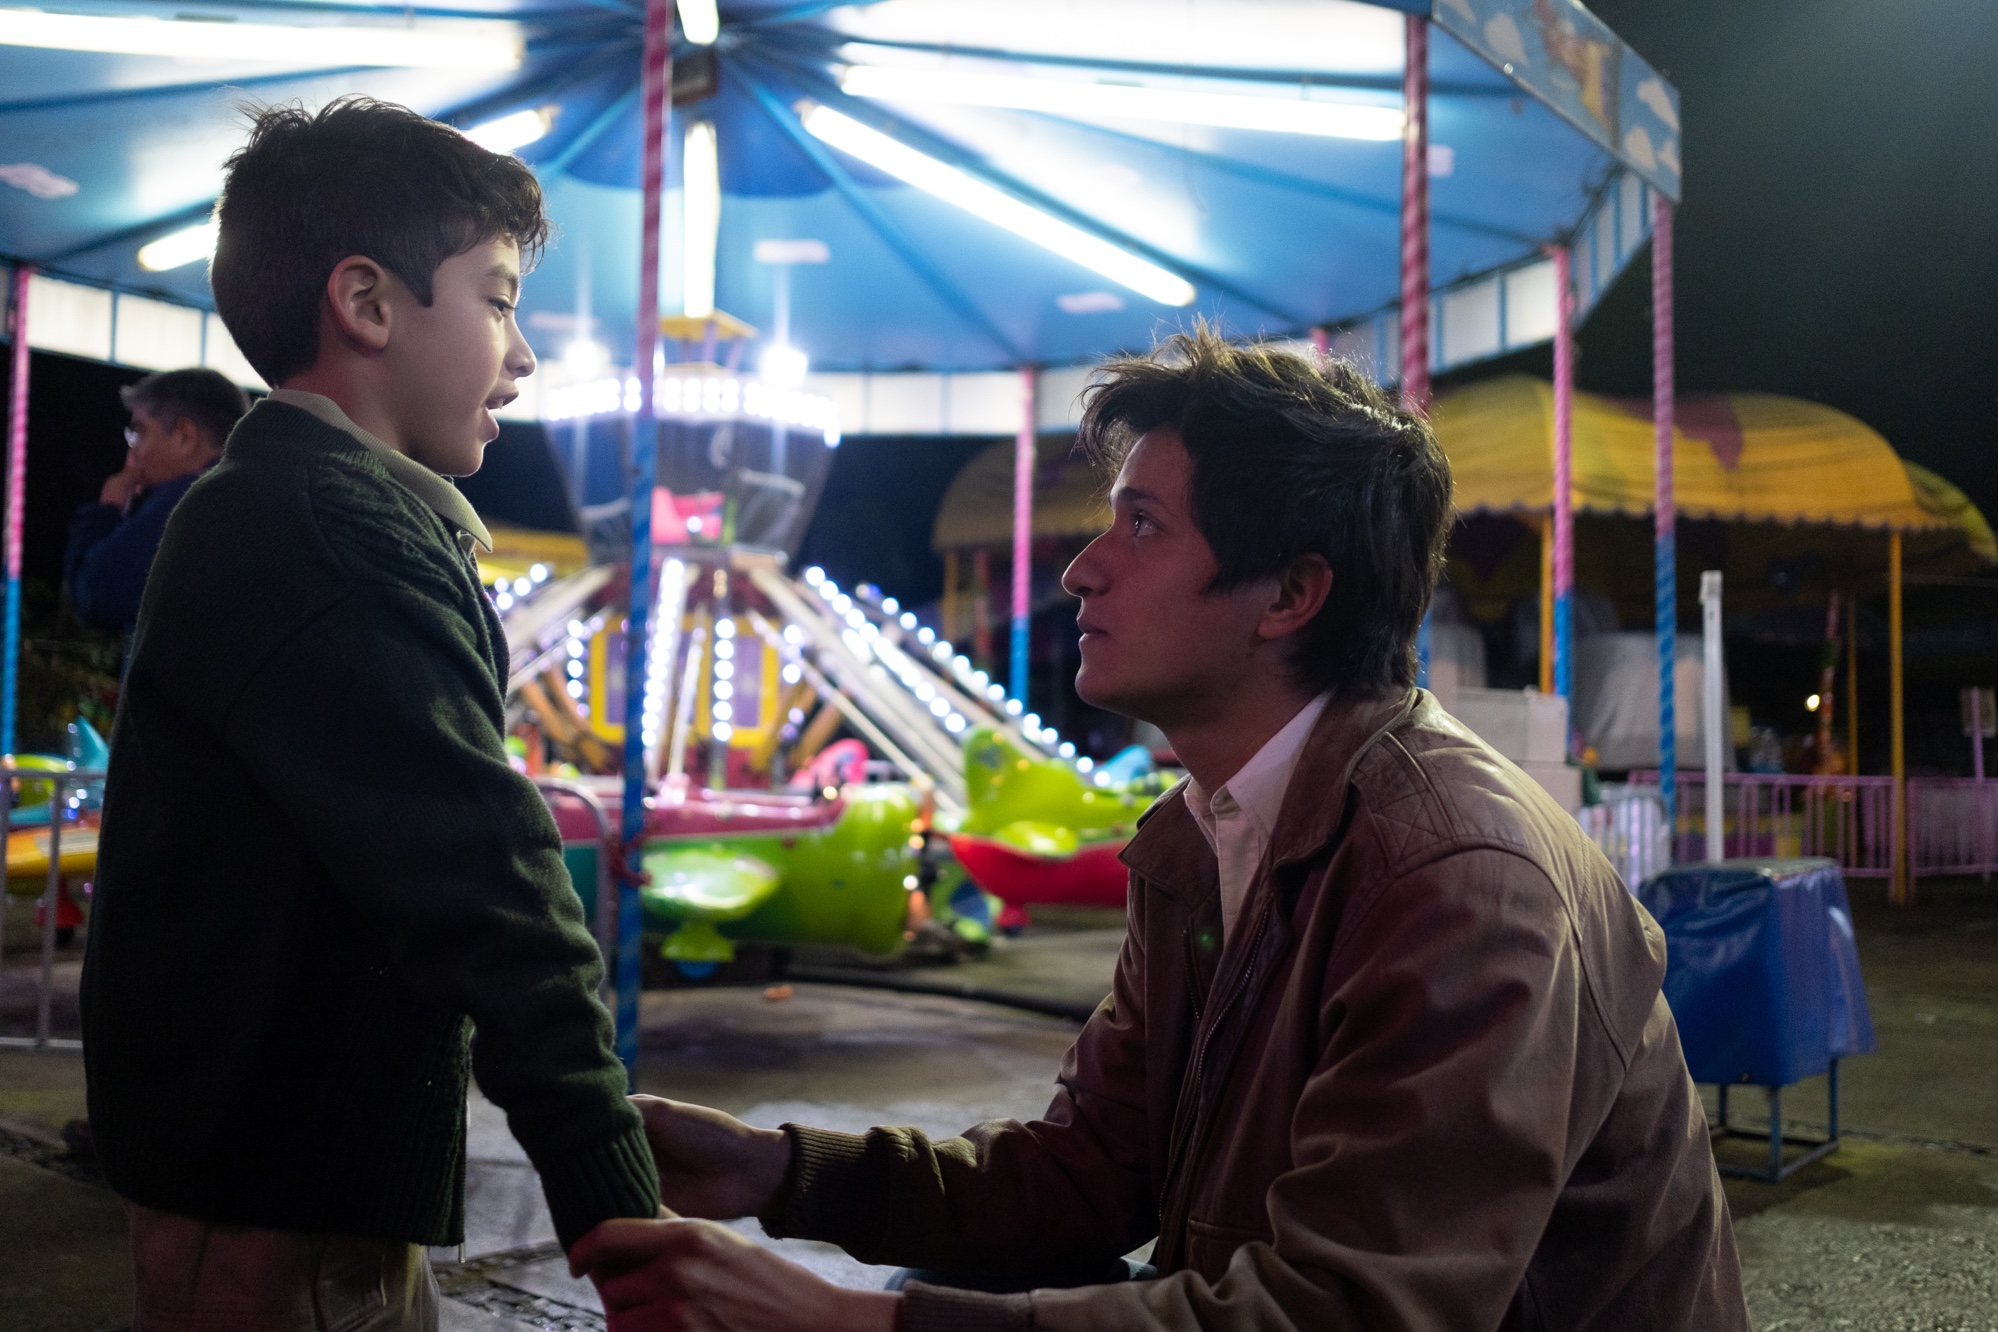 OSE ÁNGEL GARRIDO as Young Ricky, ARMANDO ESPITIA as Iván in I CARRY YOU WITH ME. Photo by Alejandro Lopez Pineda. Courtesy of Sony Pictures Classics.